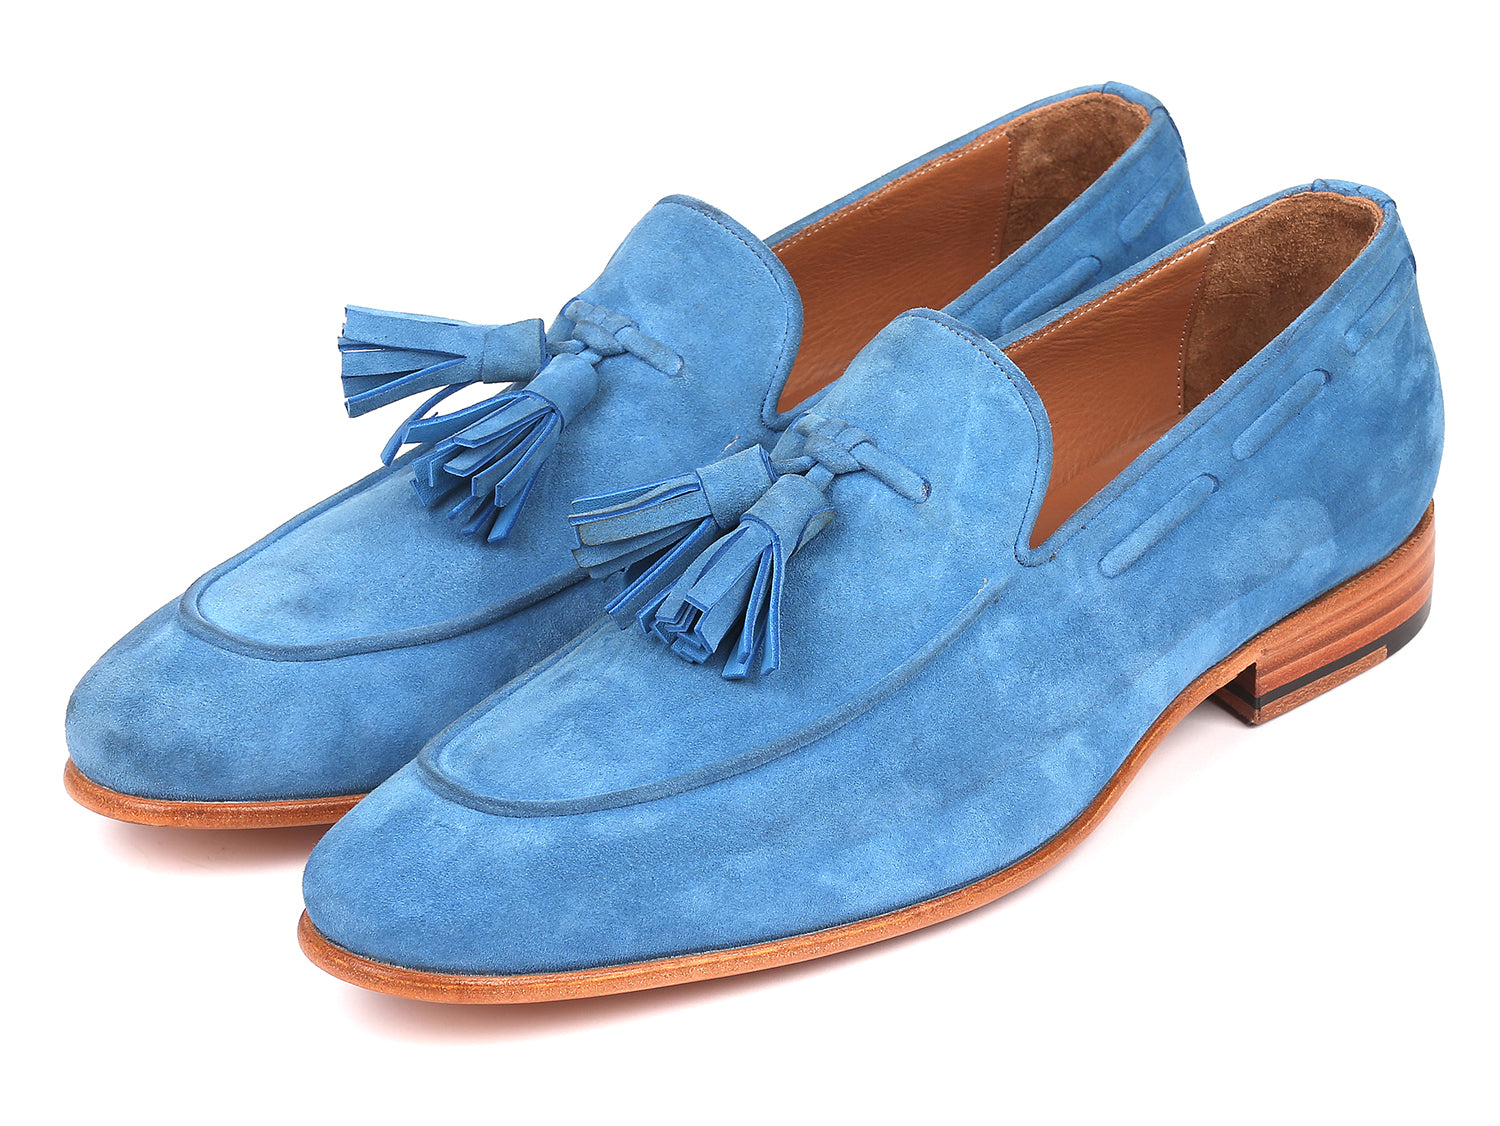 Loafer with tassels, Moccasins & Loafers, Men's